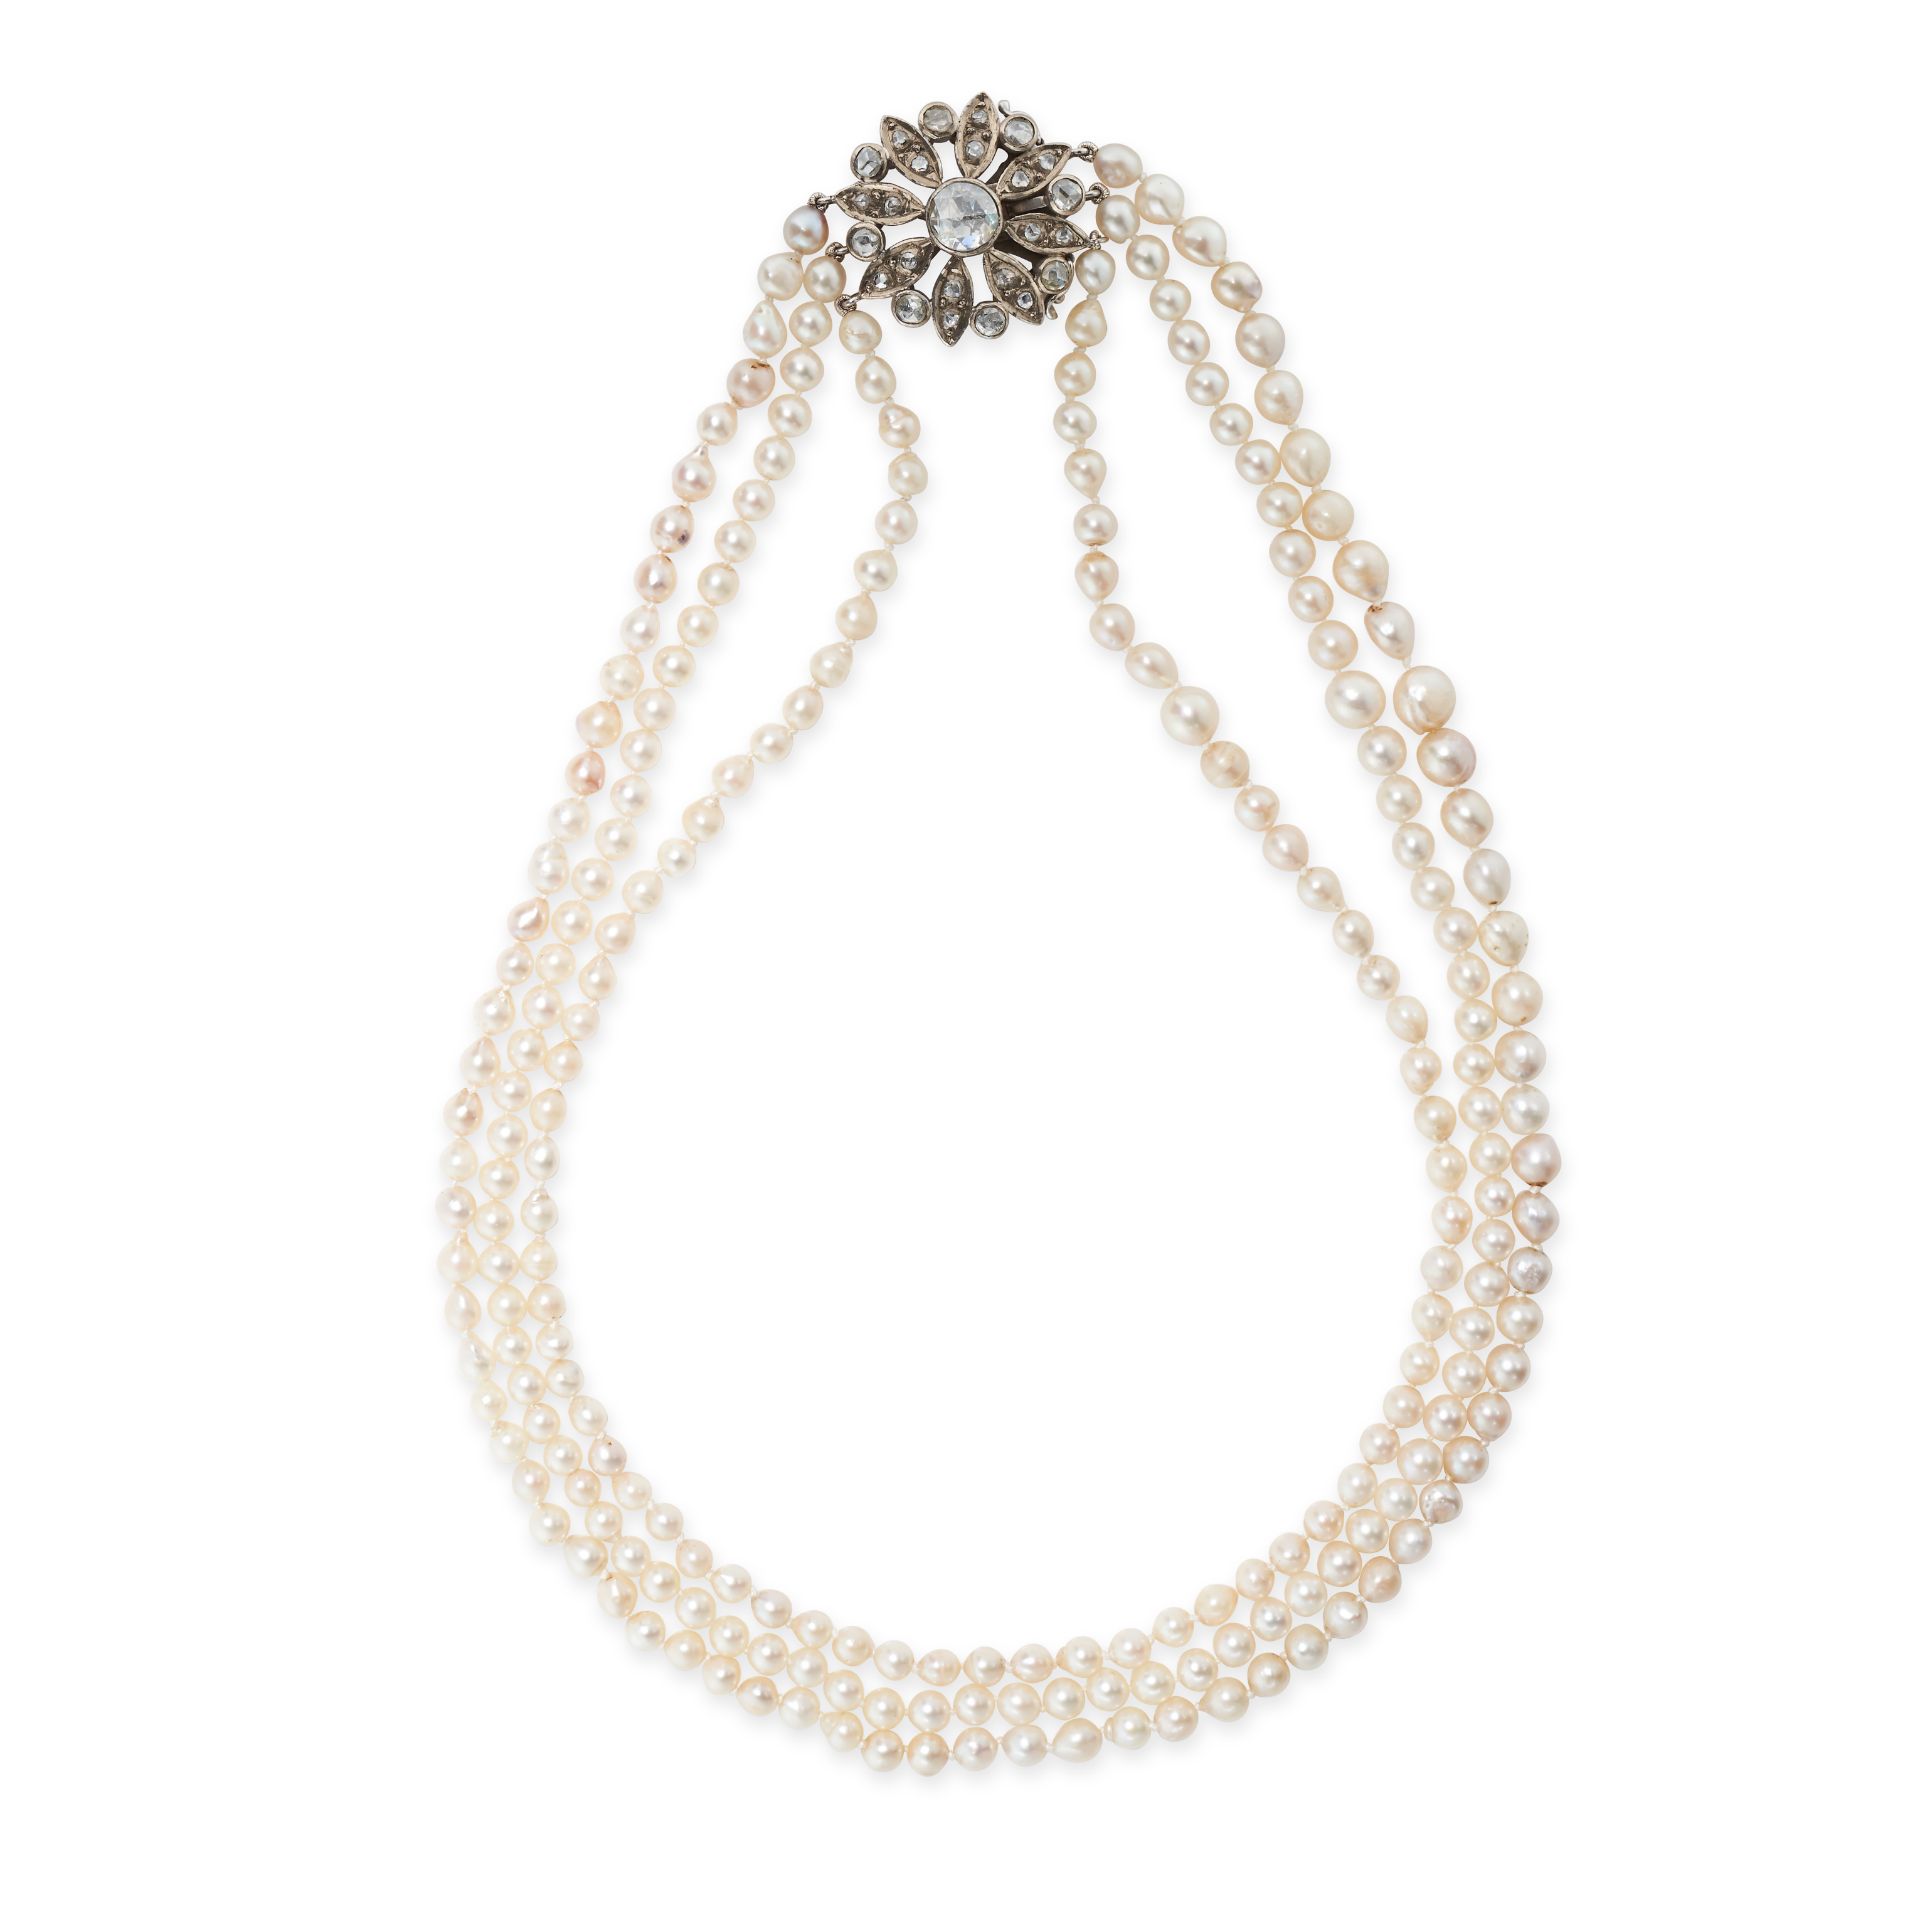 A PEARL AND DIAMOND NECKLACE in 14ct white gold, comprising three rows of pearls ranging from 4.9...